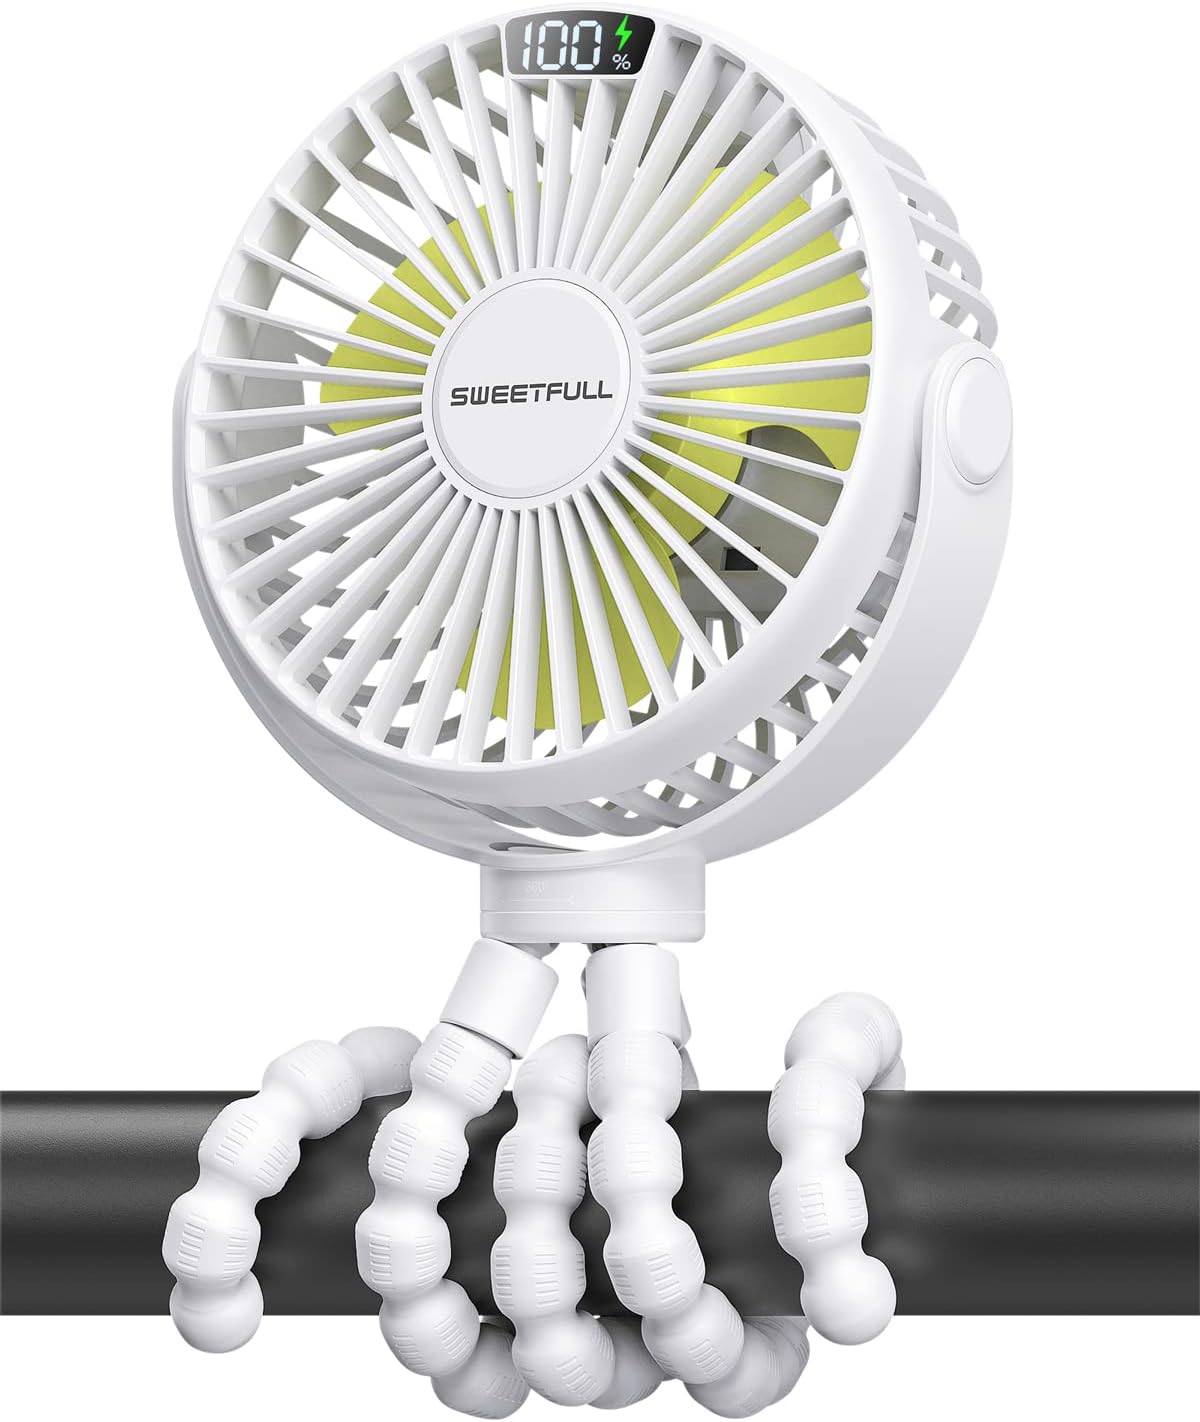 SWEETFULL Portable Stroller Fan, LED Display 6000mAh Battery Operated Mini Clip Fan, 4 Speed Rechargeable Small Personal Fan Handheld Desk Cooling Fan For Car Seat Crib Treadmill Travel(White)